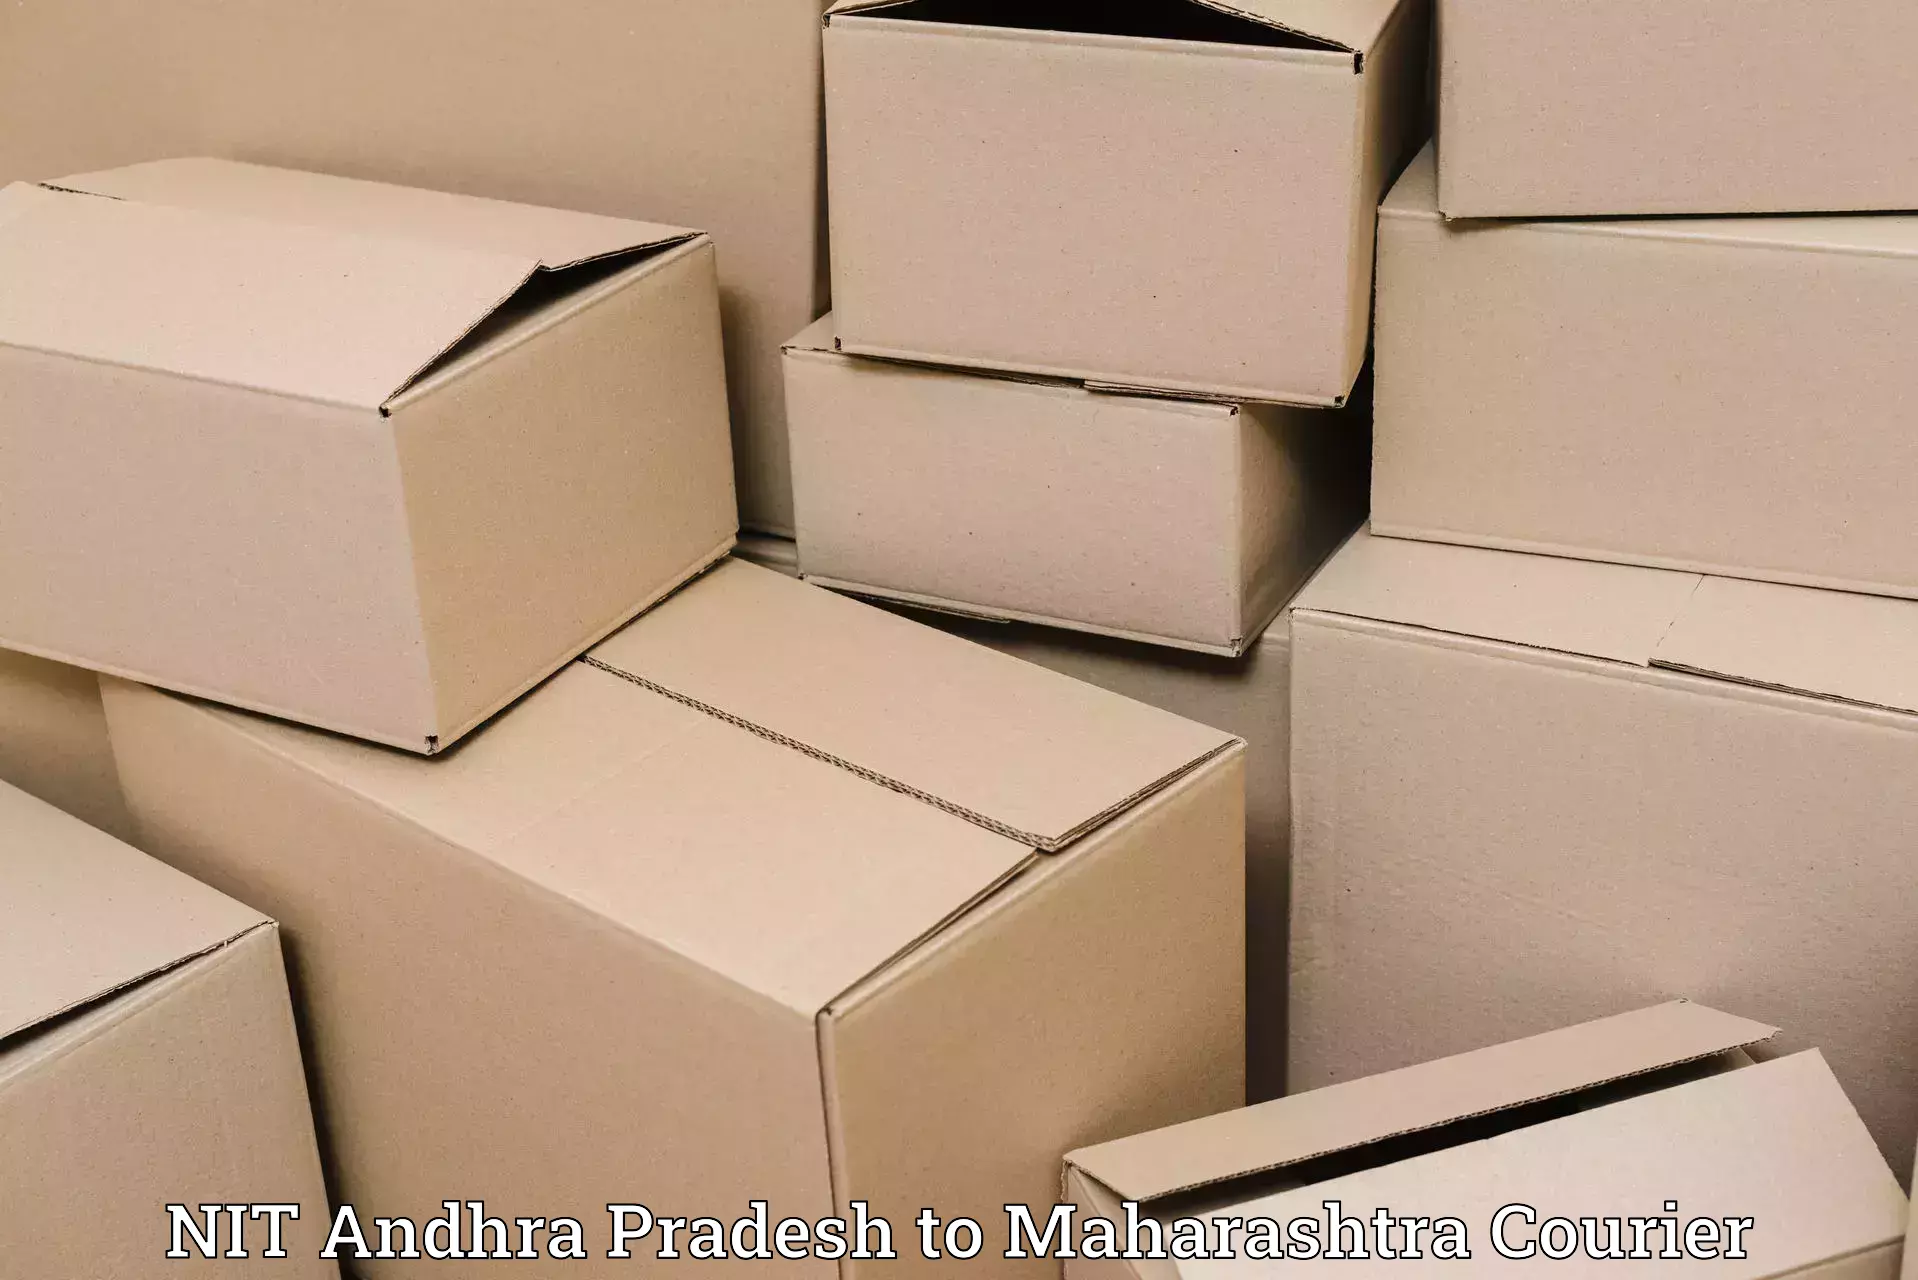 Business courier solutions NIT Andhra Pradesh to Loni Ahmednagar